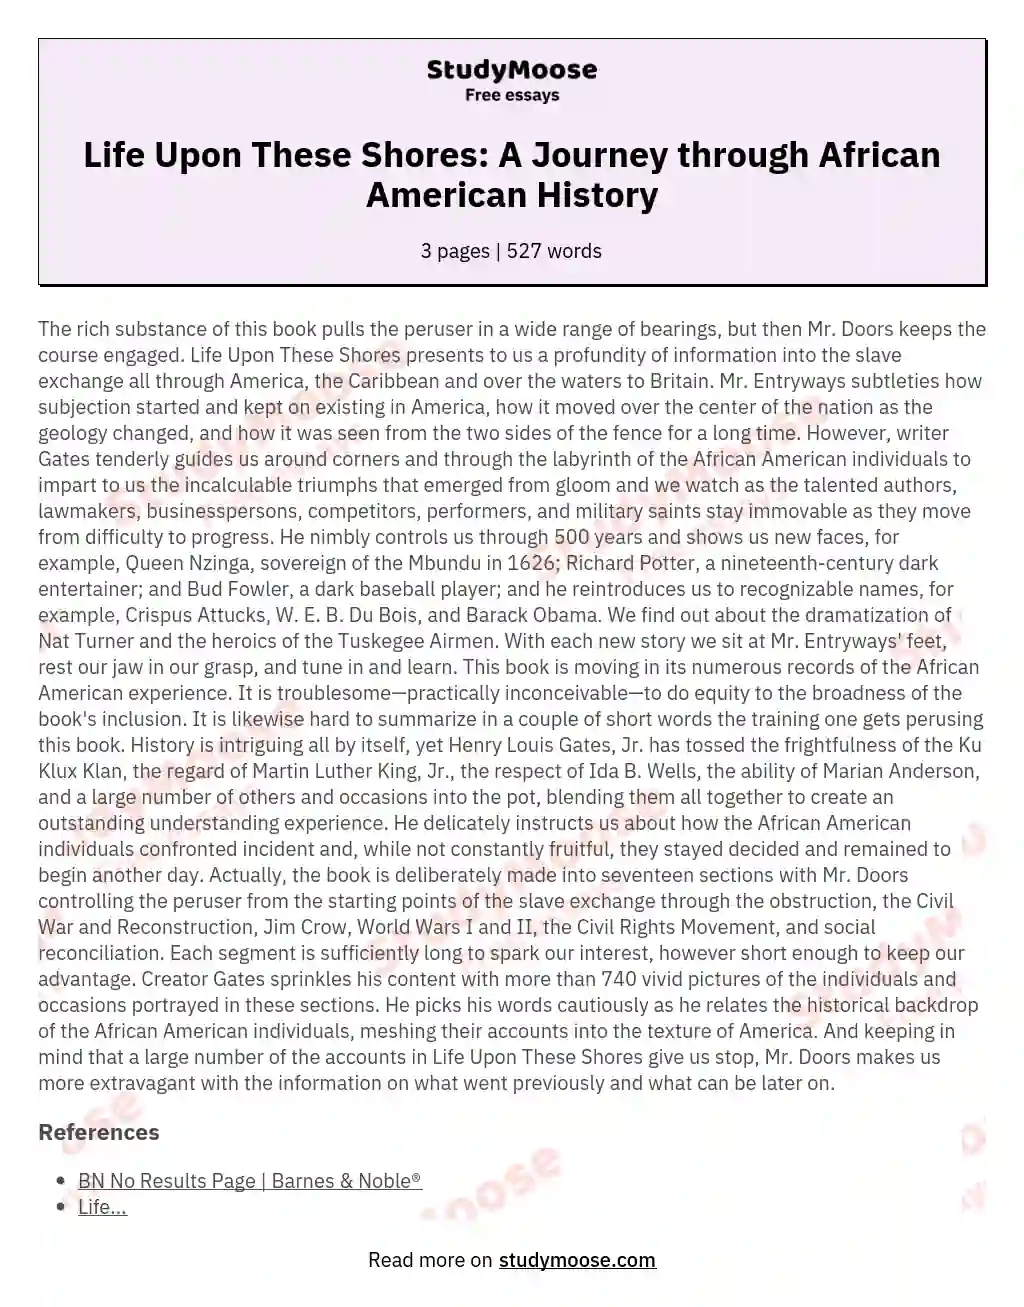 Life Upon These Shores: A Journey through African American History essay